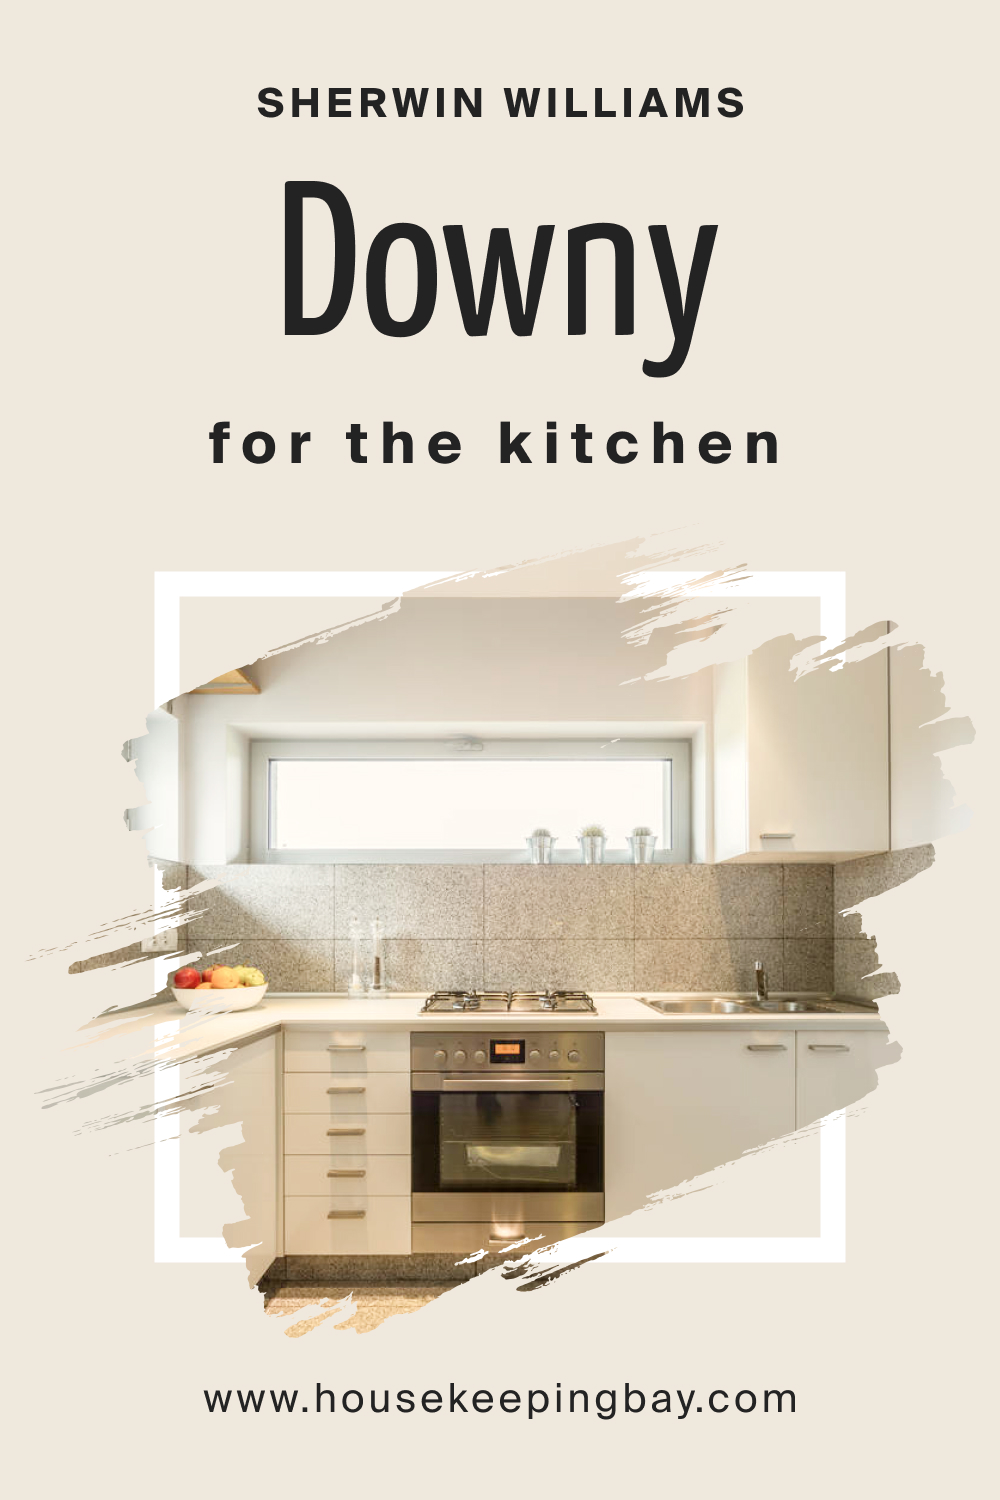 Sherwin Williams. SW Downy For the Kitchen